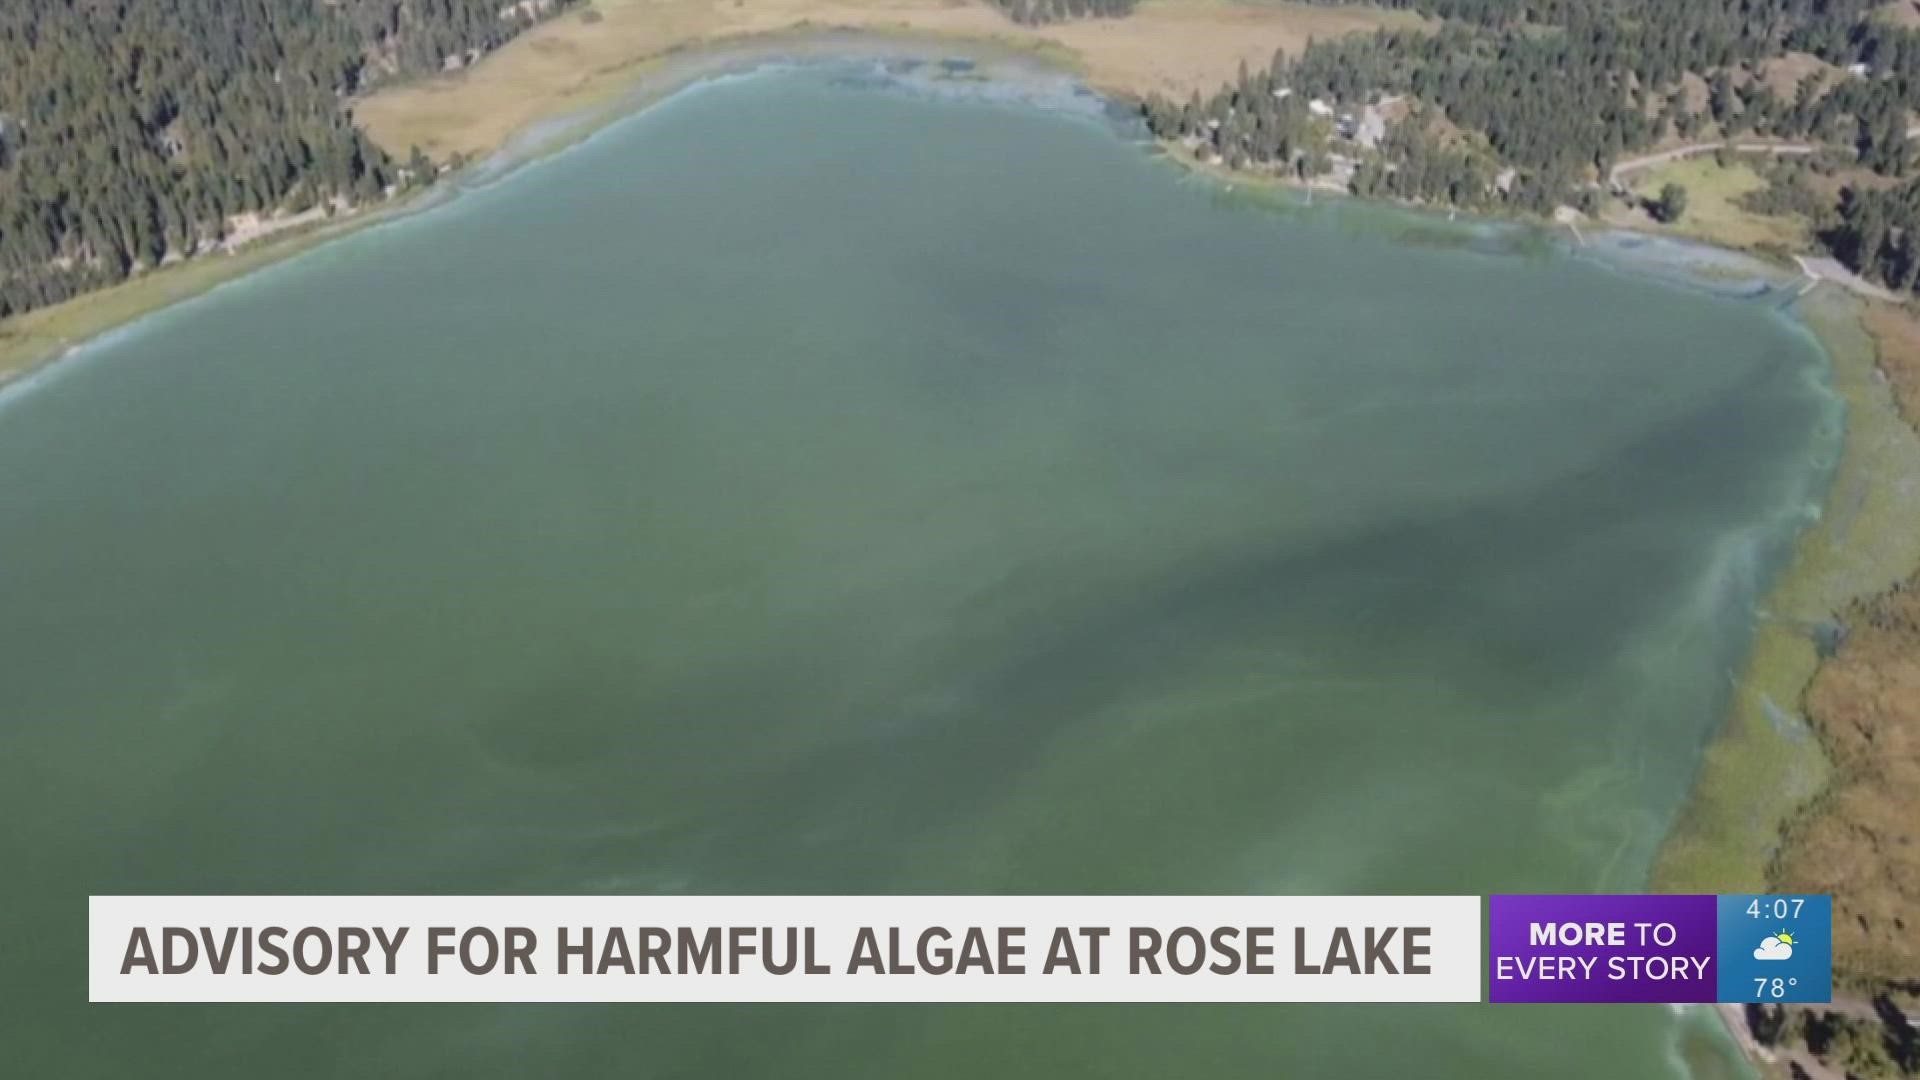 The public health advisory comes after a recent water sample by Idaho's environmental department indicated the presence of harmful blue-green algae in Rose Lake.